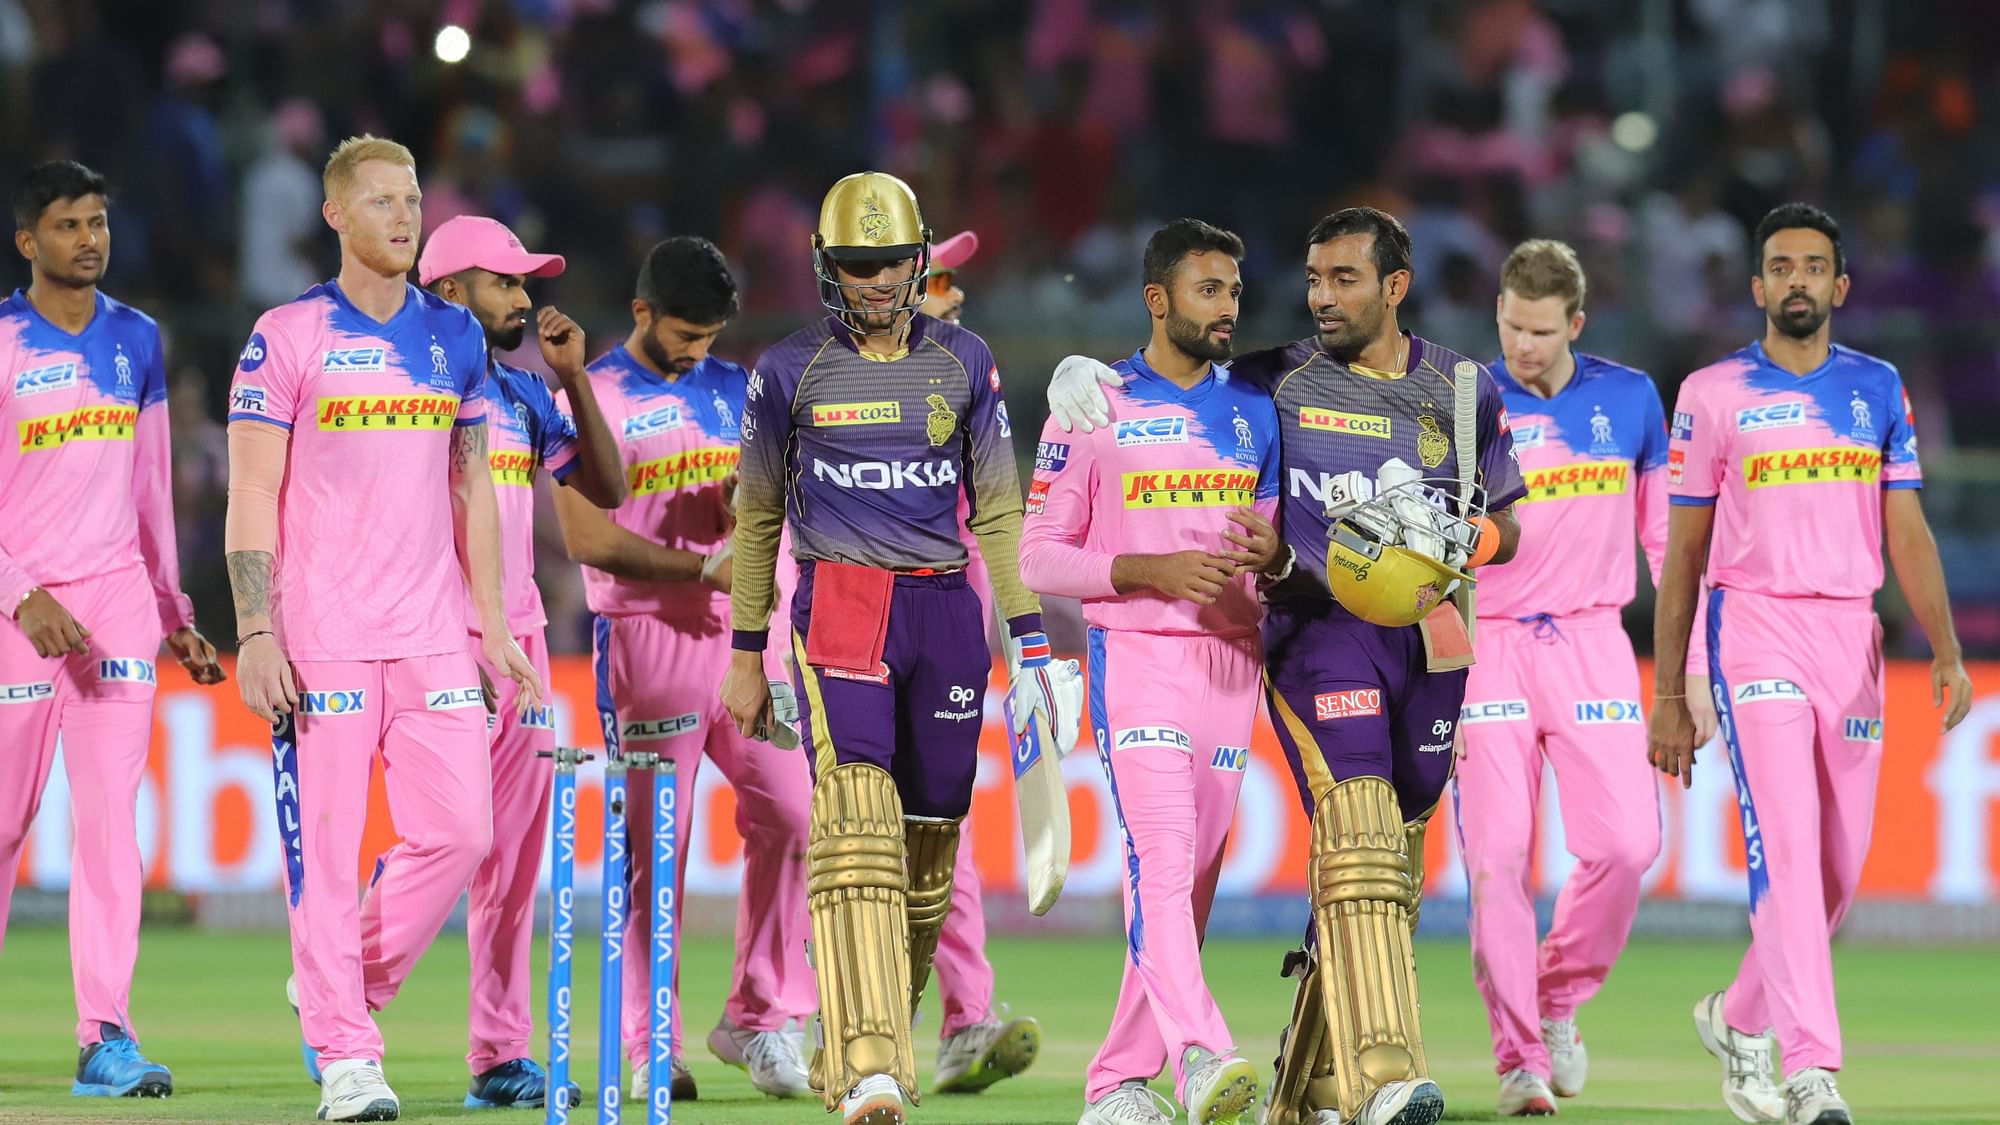 Kolkata Knight Riders defeated Rajasthan Royals in Jaipur on the 7th April 2019